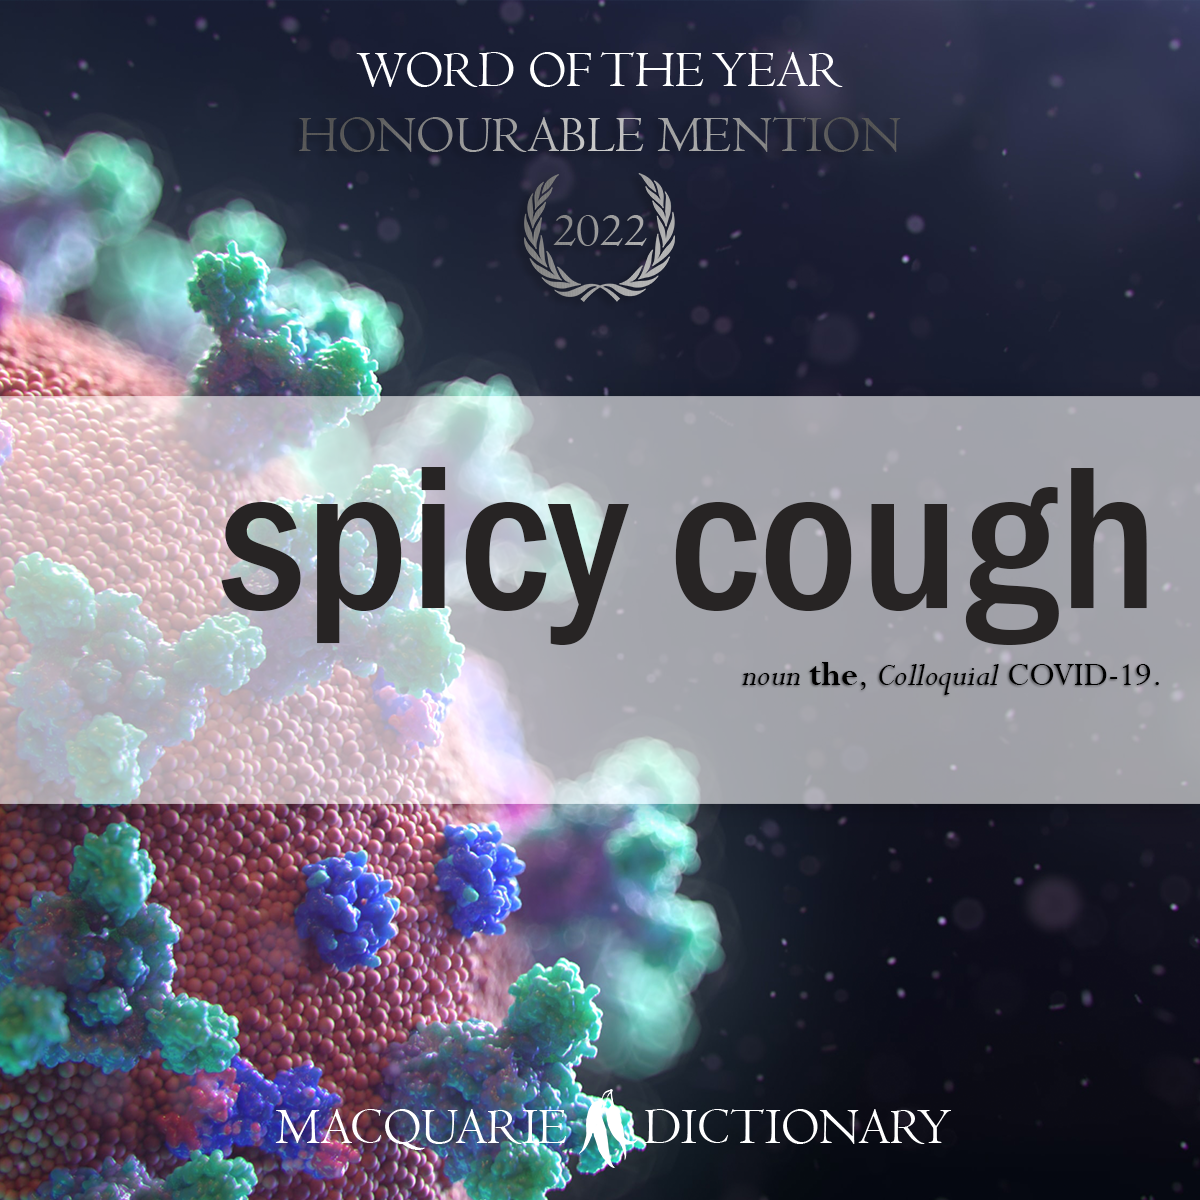 Word of the Year 2022 - spicy cough